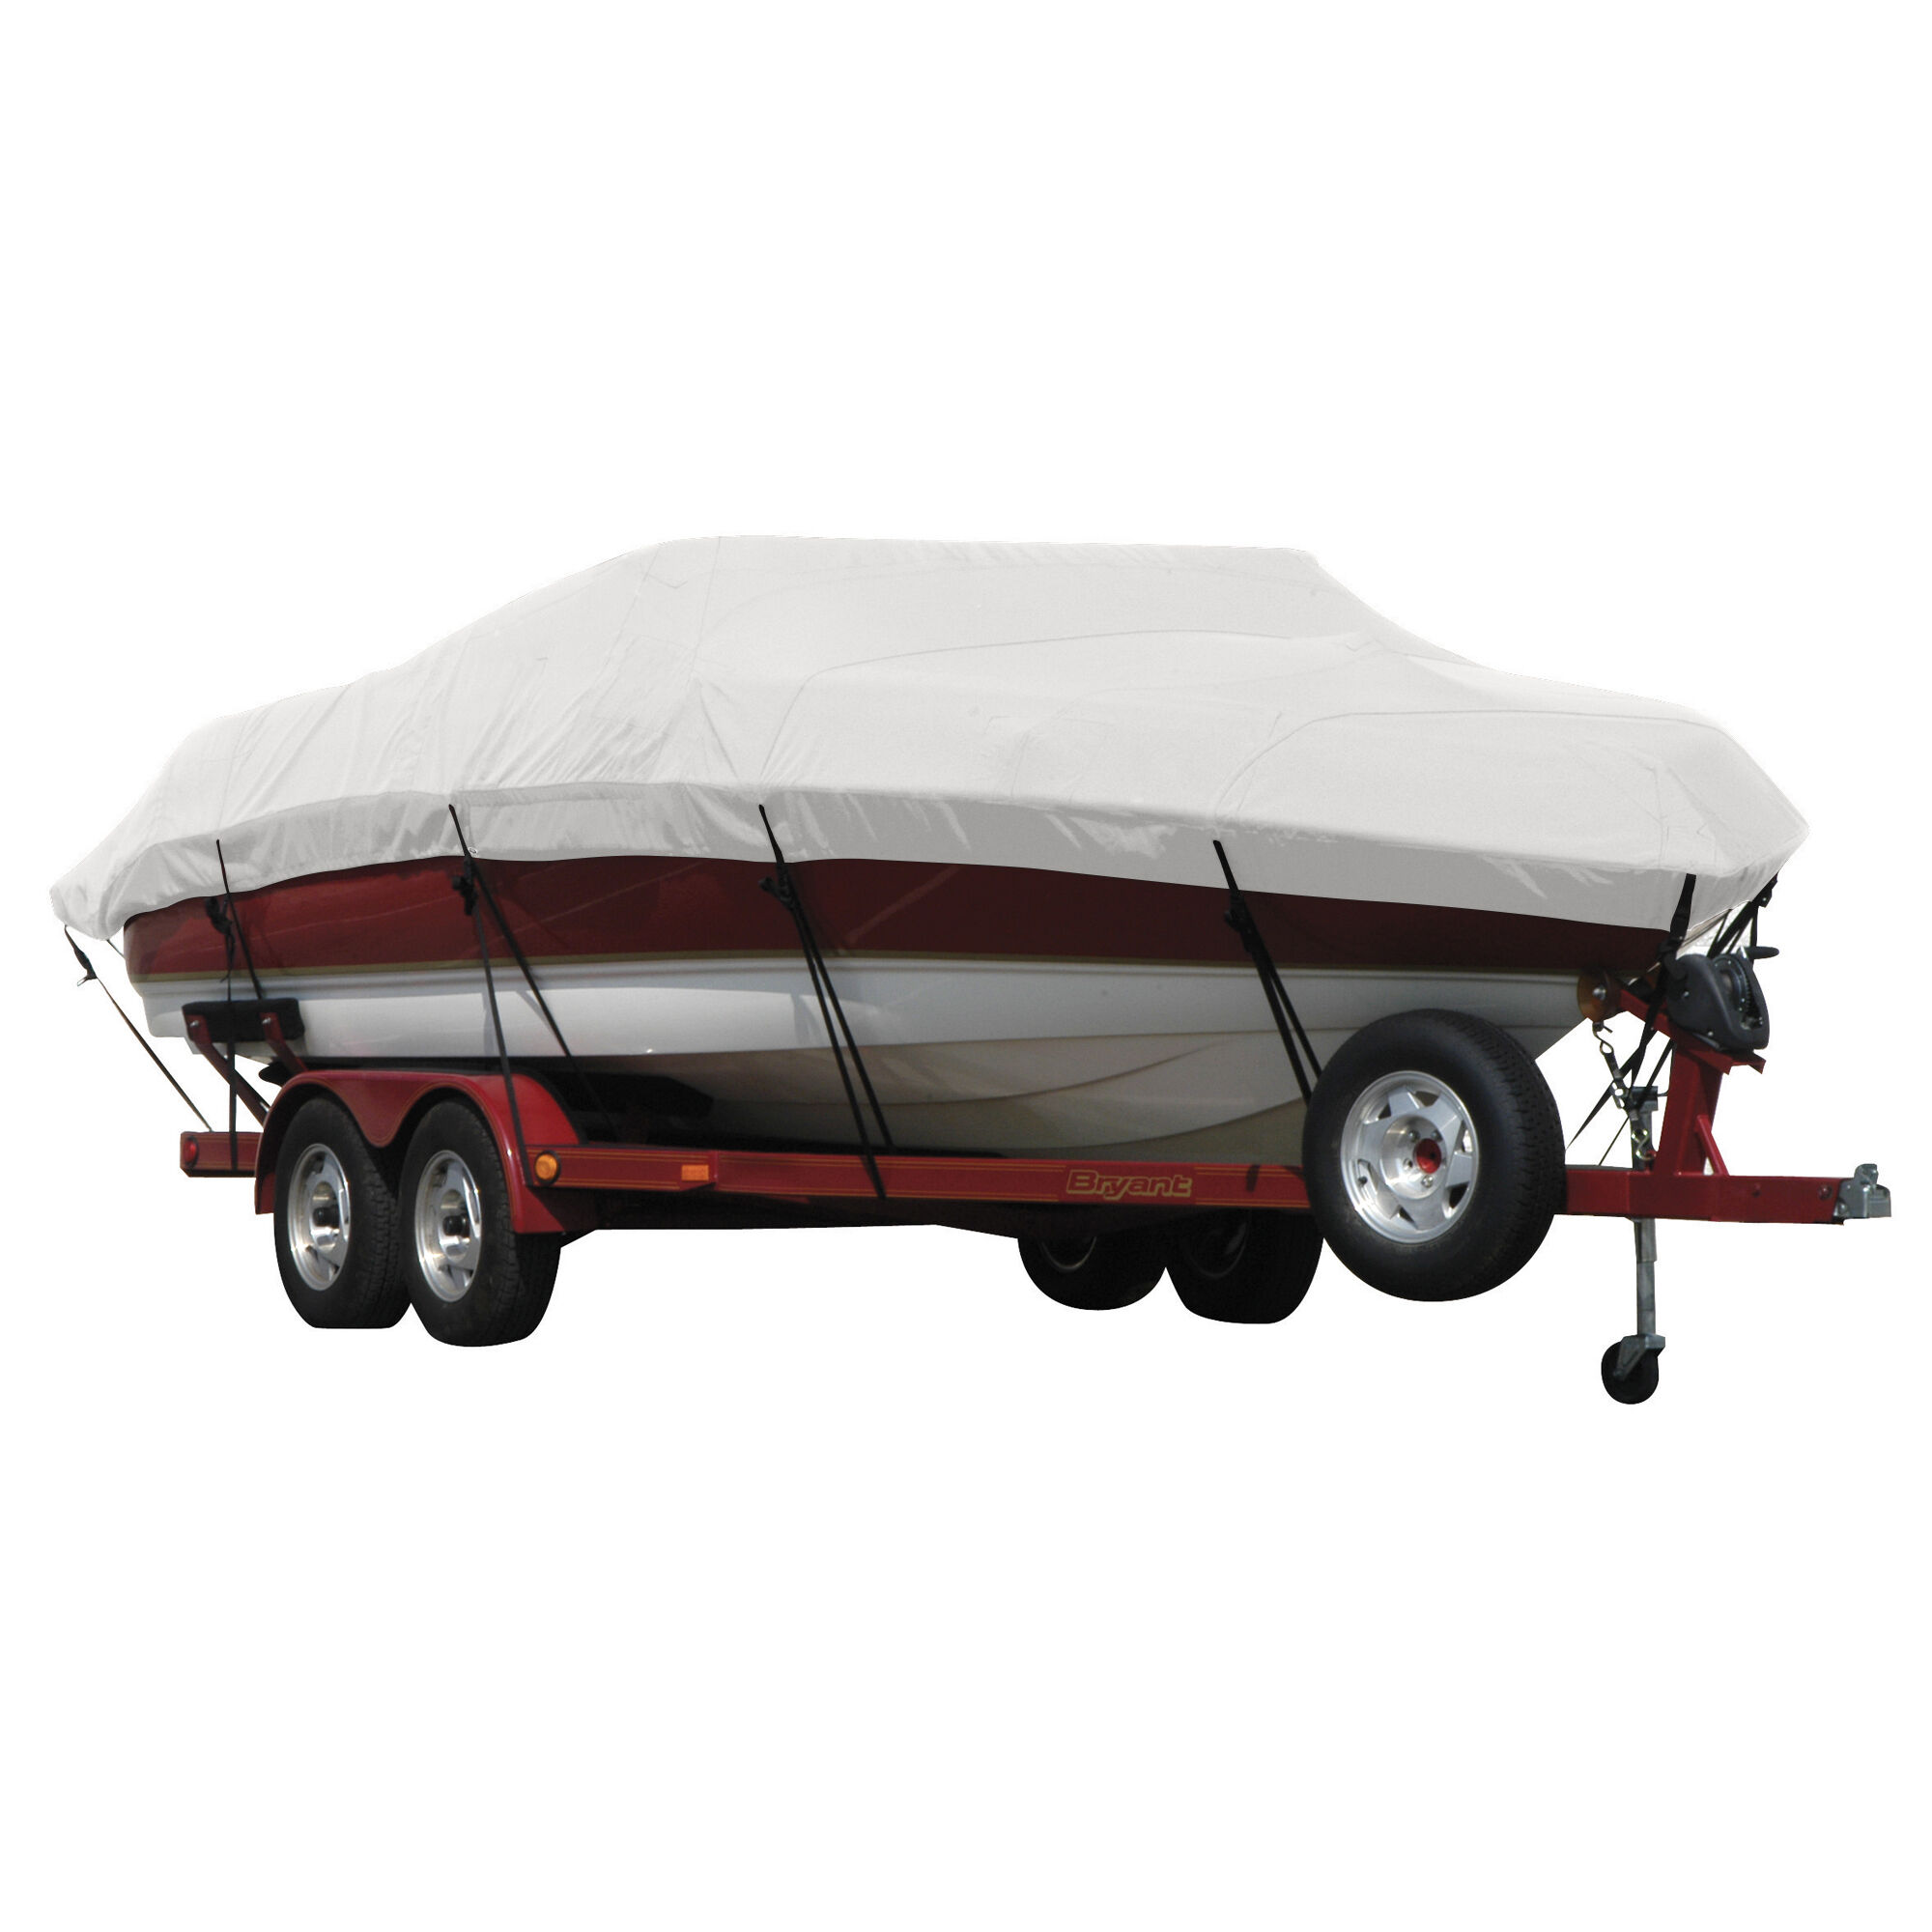 Covermate Exact Fit Sunbrella Boat Cover for Bayliner Classic 192 Ey Classic 192 Ey Does Not Accommodate Strb Ladderi/O. Natural in Natural Tan